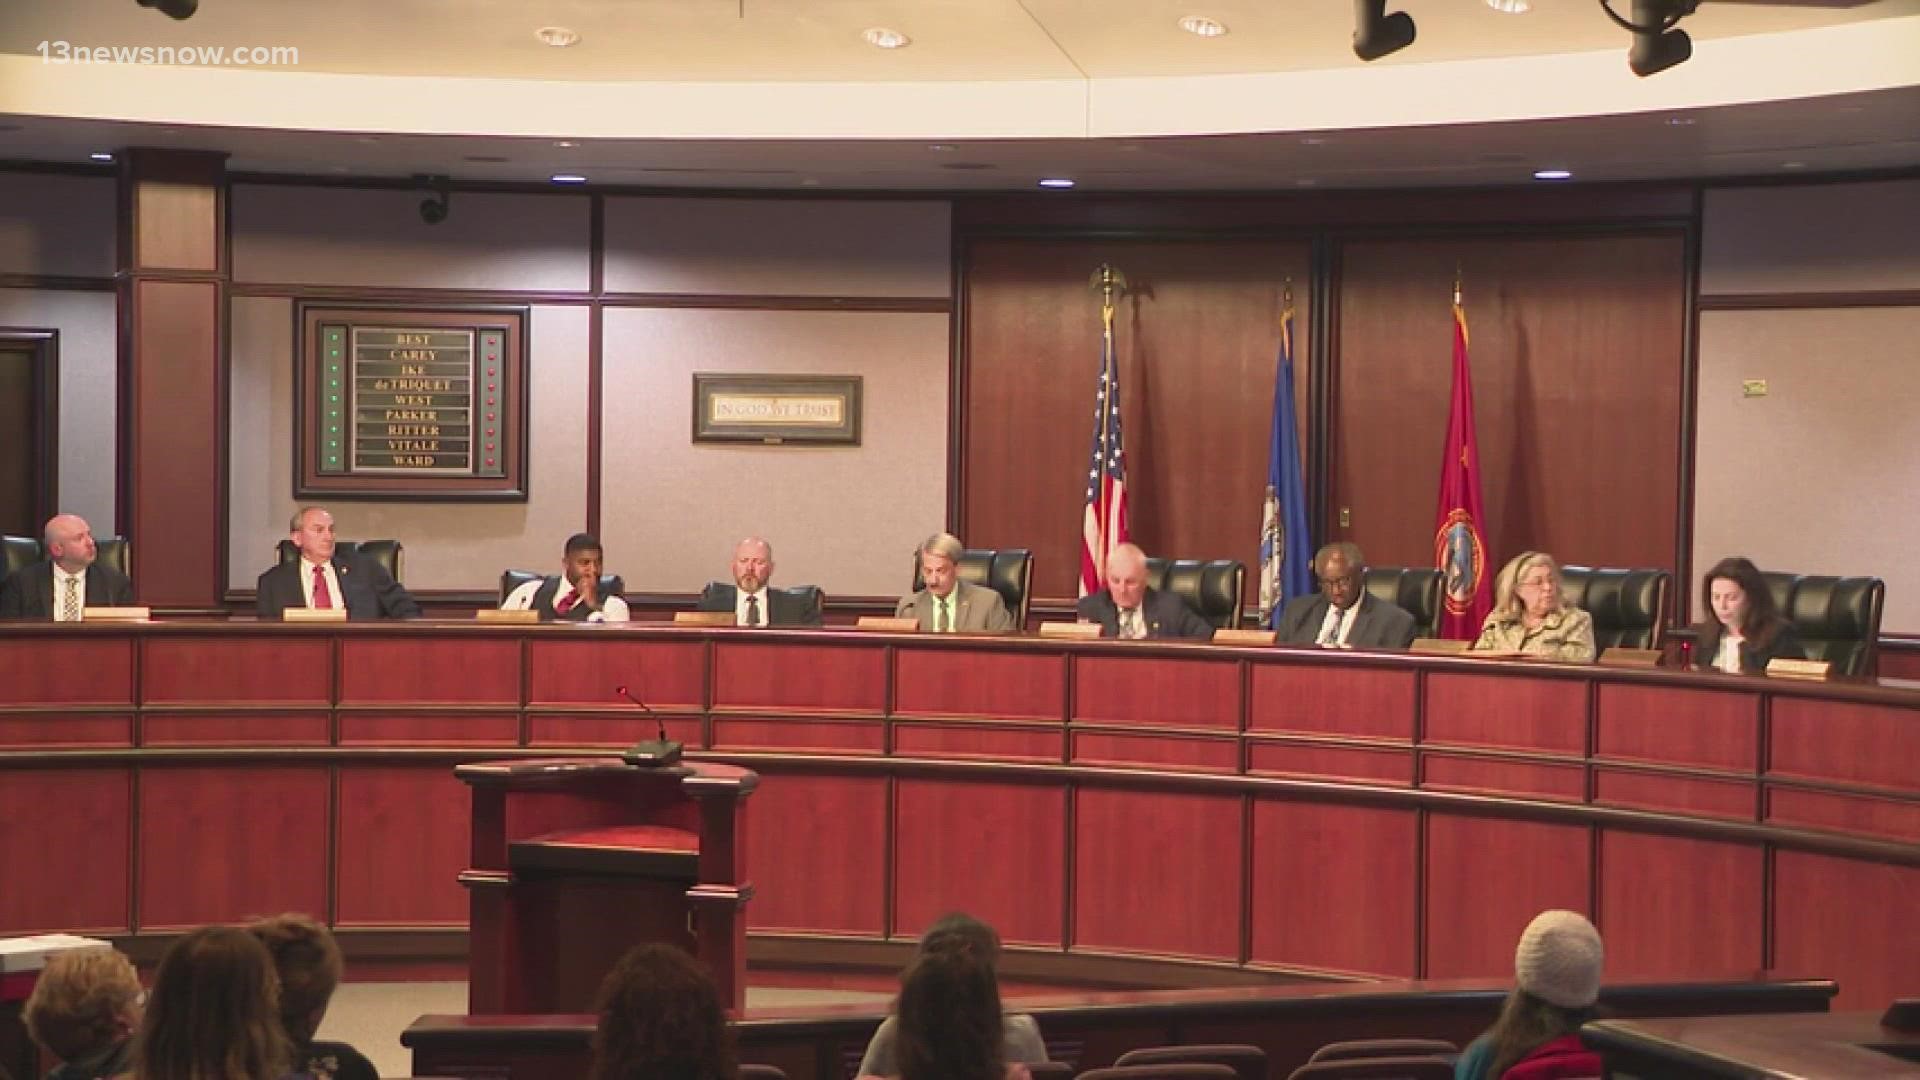 The majority of city council approved a meals tax increase from 5.5% to 6%.